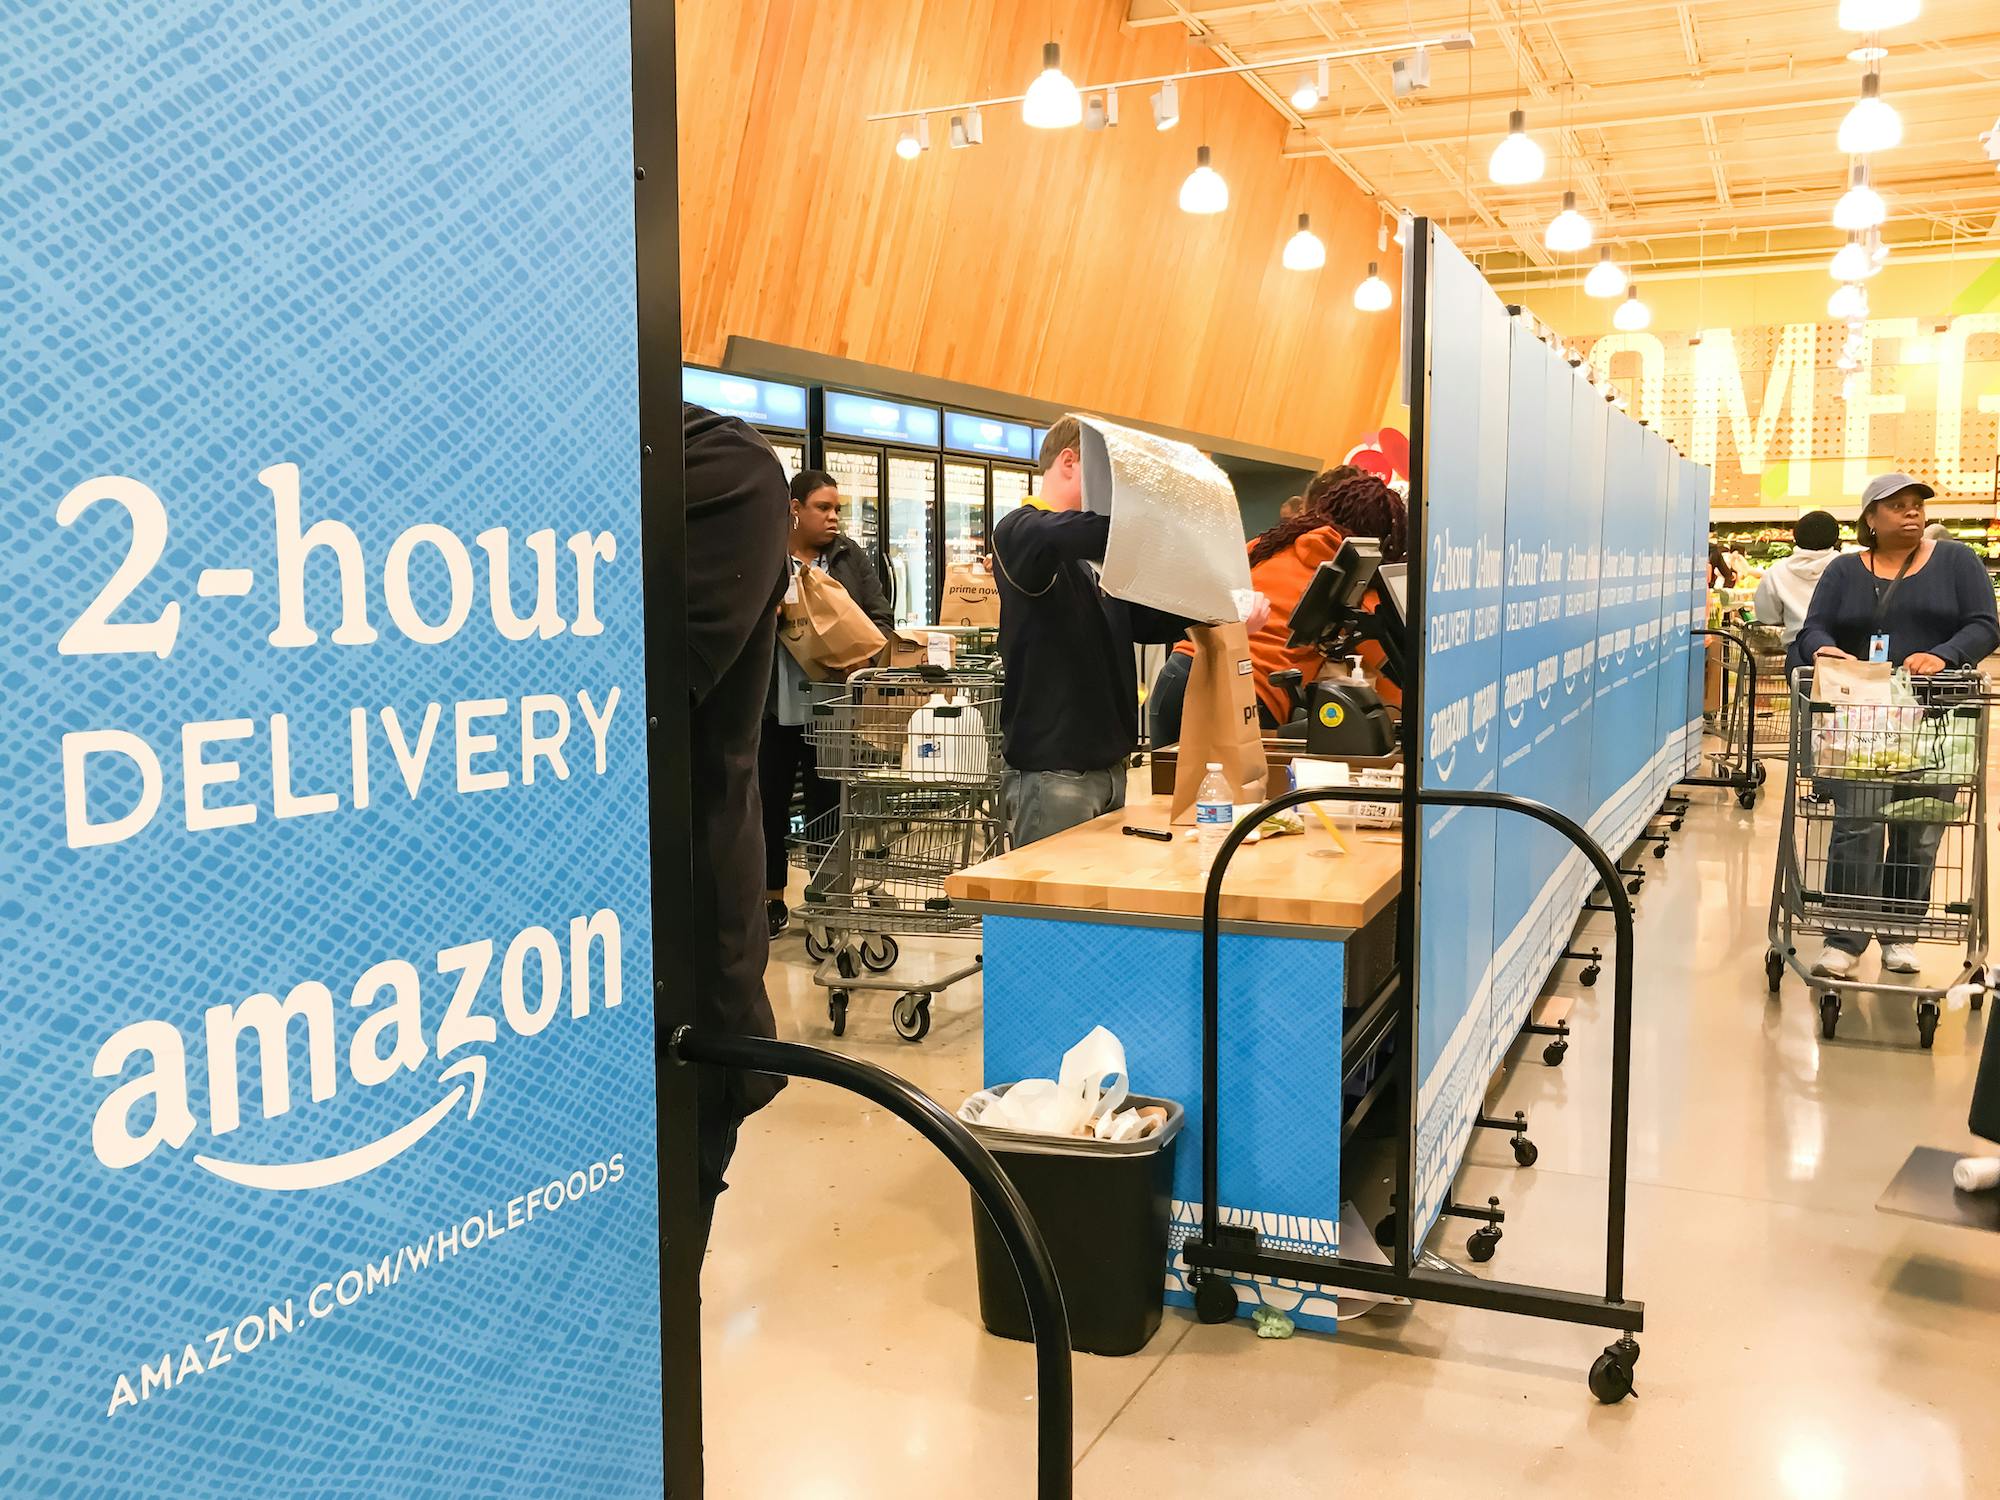 2-hour delivery for amazon delivery sign at Whole Foods